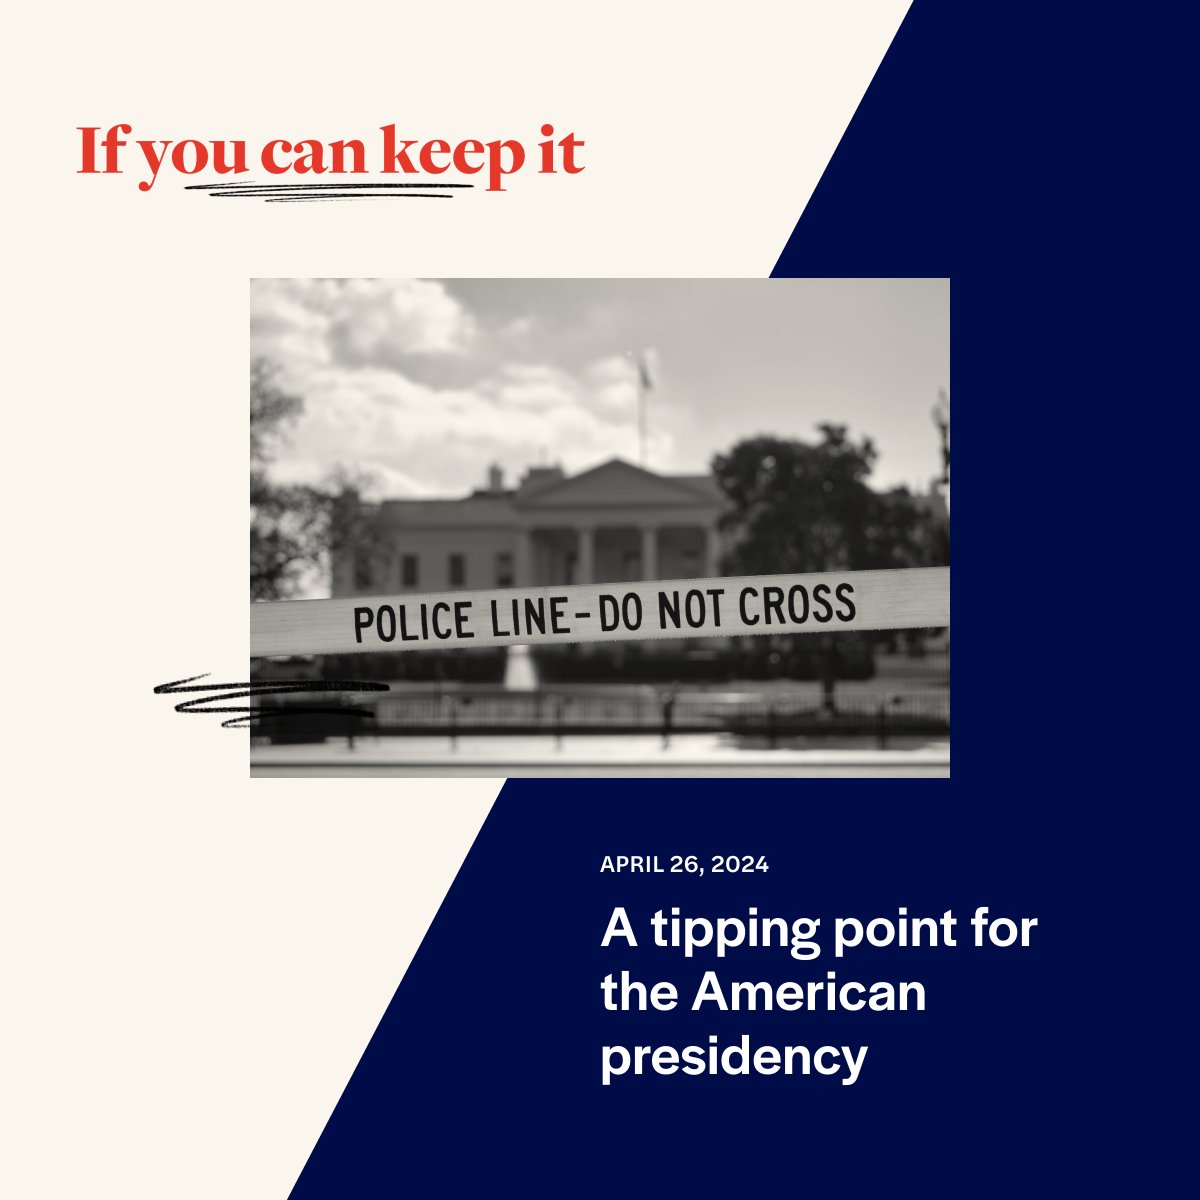 In the latest >If you can keep it< ⚖️ @KPNatsFan and @conorsg dissect the Trump immunity SCOTUS hearing ❓ Why political parties matter, explained by Chris Parr & @jrdresden 🗳️ @deseretmagazine on contingent elections And more. Read and subscribe: ifyoucankeep.it